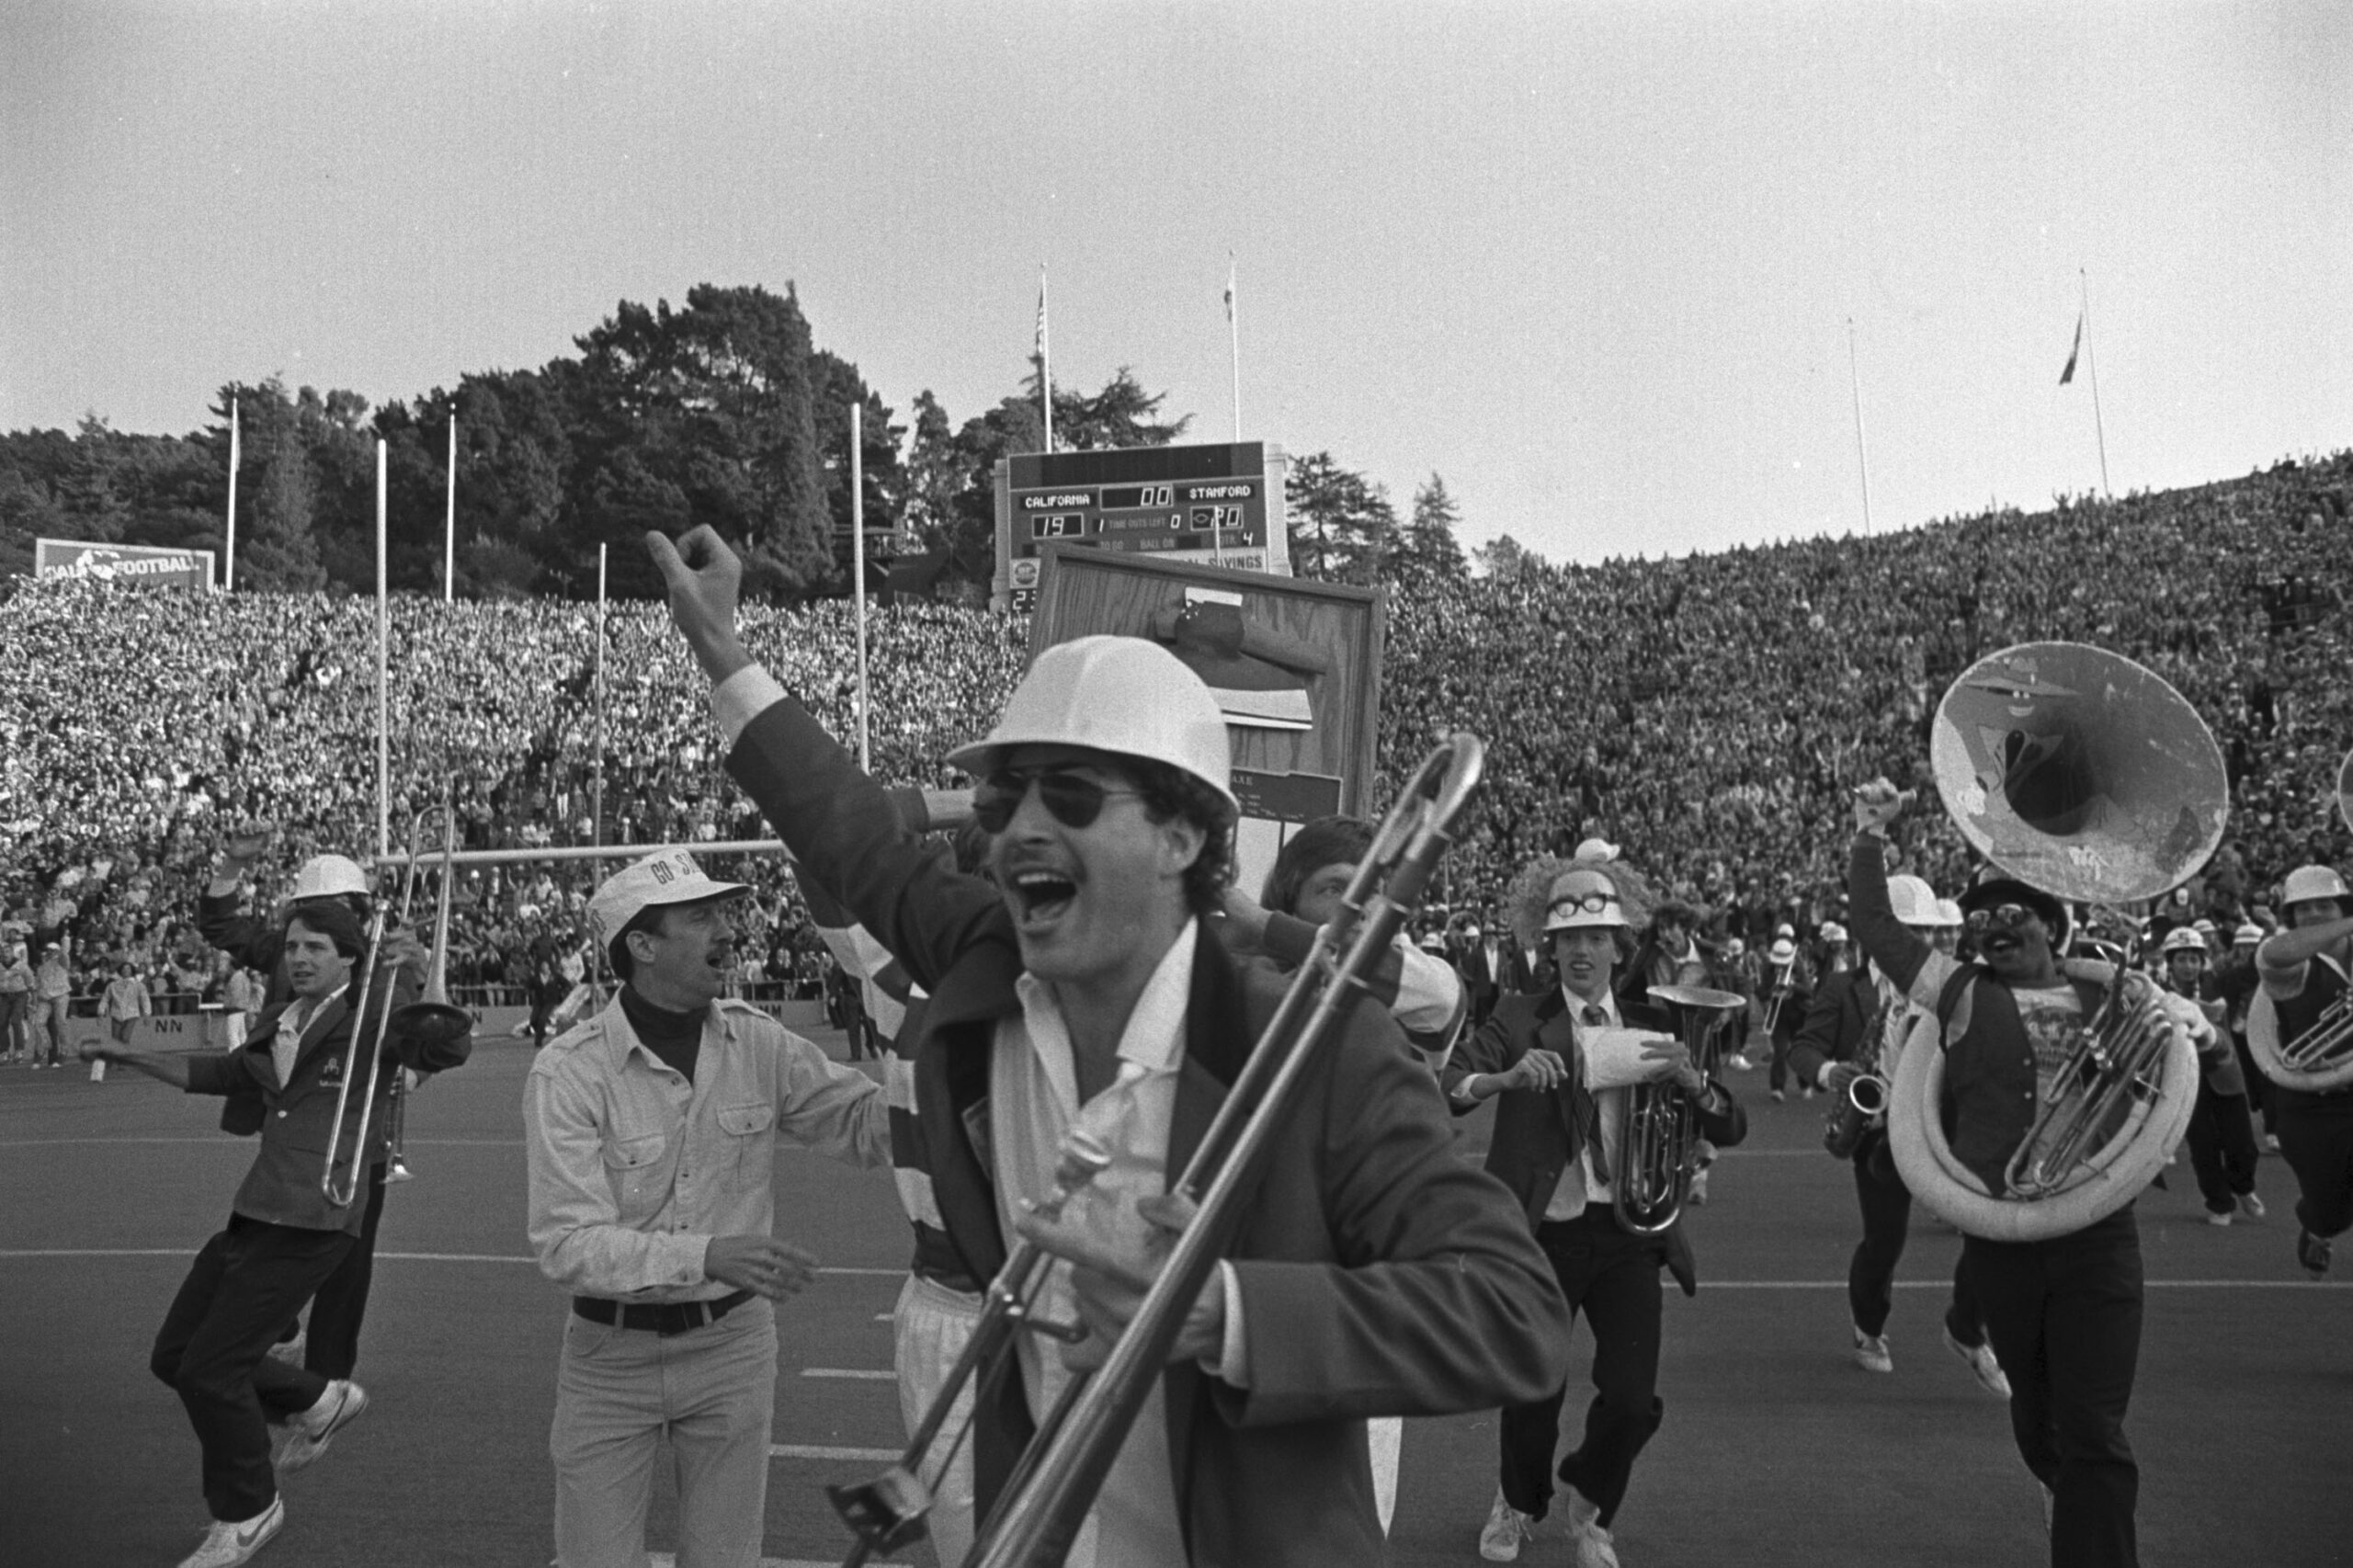 The Stanford band goes on the field at the end of the Cal-Stanford game in Berkeley, thinking they had won, Nov. 20, 1982.  Cal's Kevin Moen weaved his way through the band to score a touchdown after time had run out, giving Cal a 25-20 win over Stanford